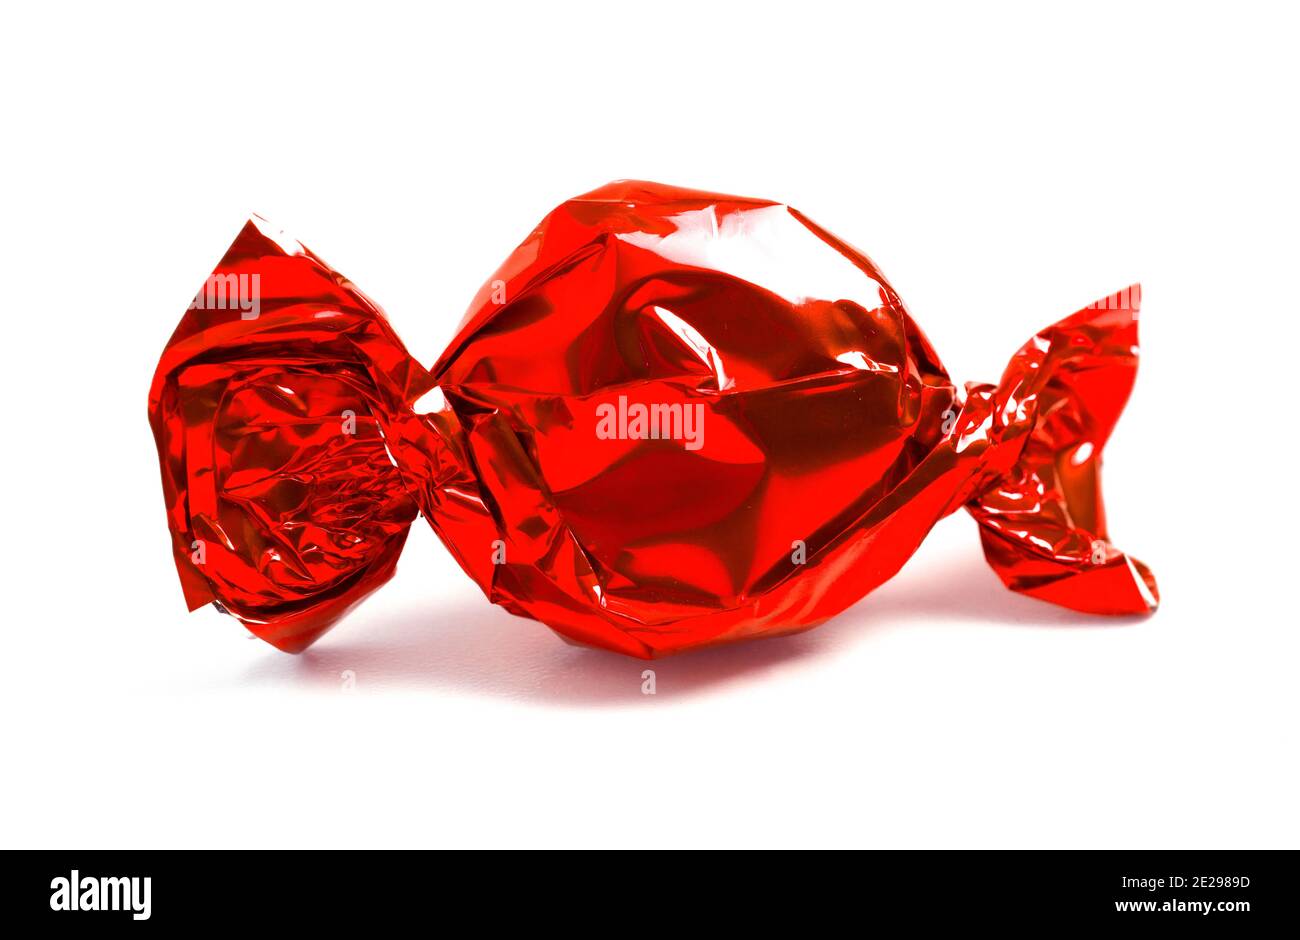 Single Wrapped Red Candy Isolated on a White Background Stock Photo - Alamy